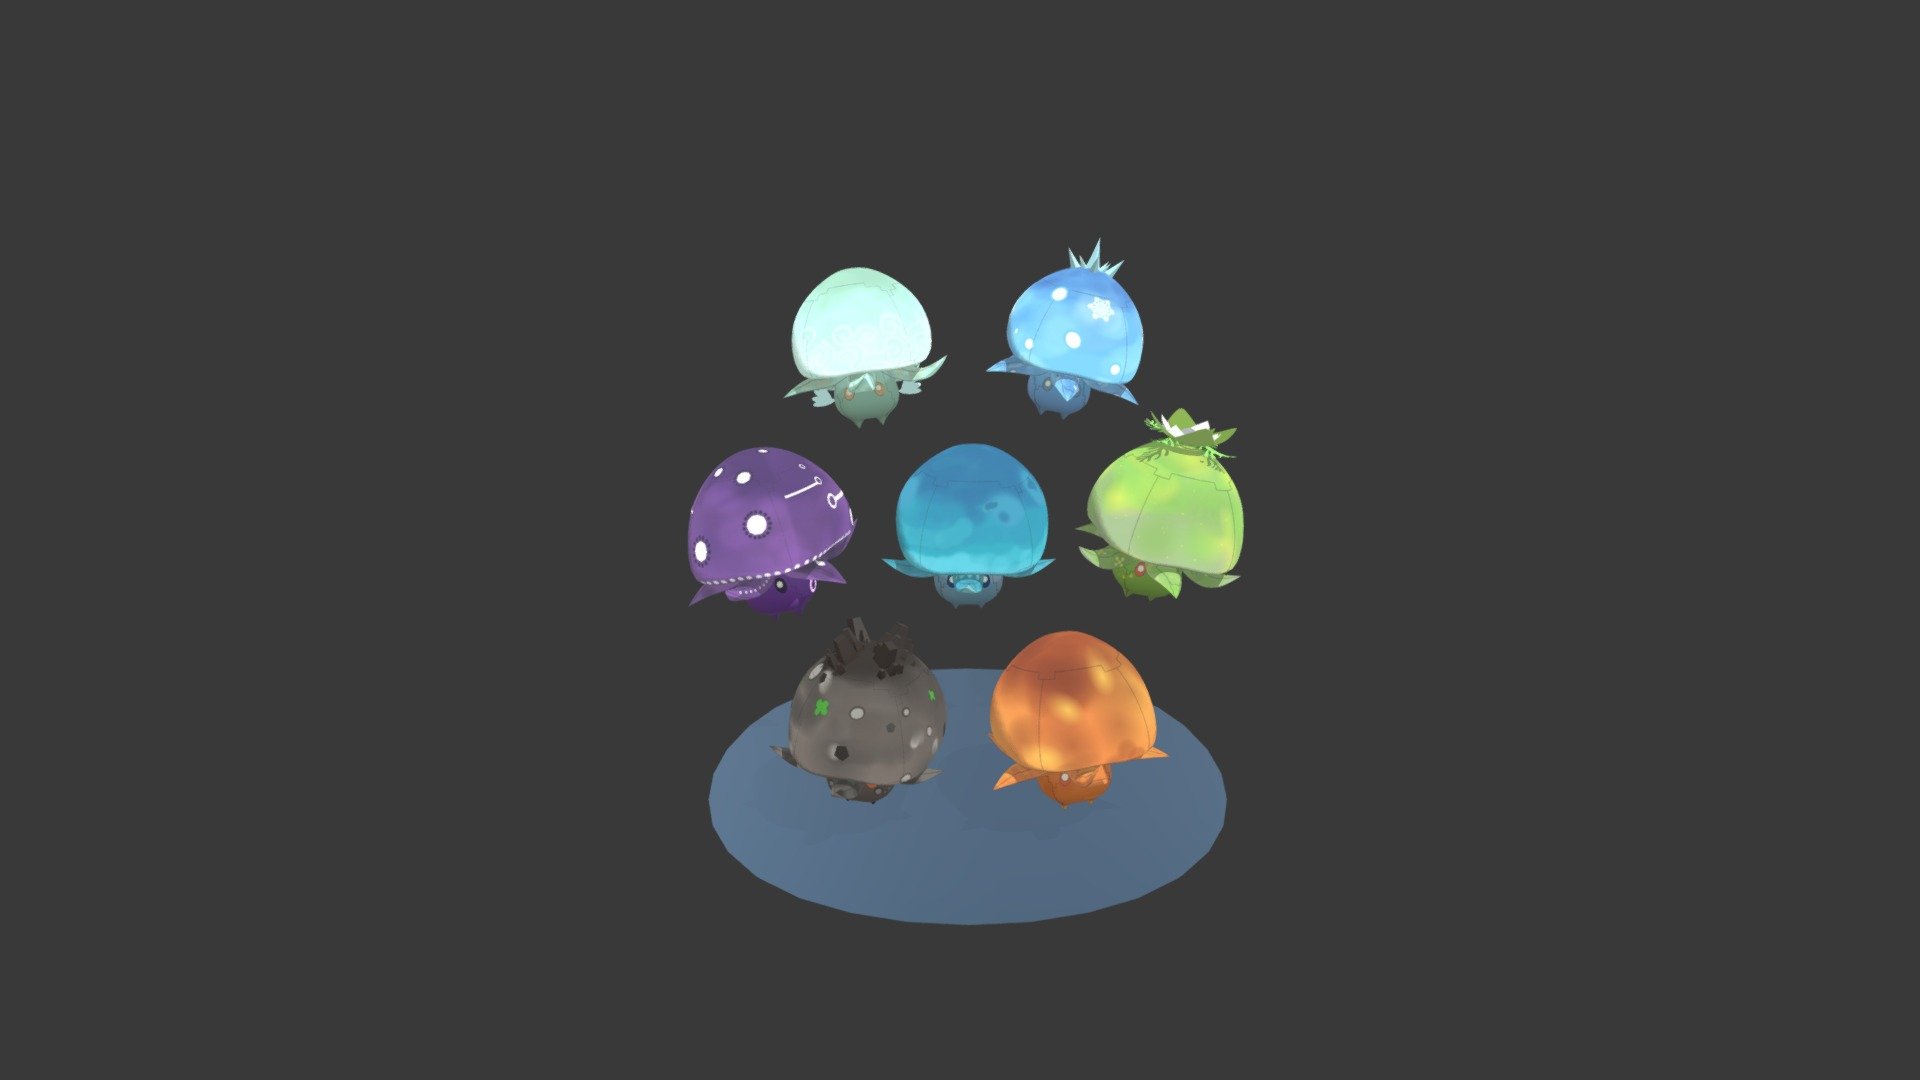 3D Model inspired by the Hydro Fungus from the game Genshin Impact.

All fungus are original concept except for the Hydro Fungus :) - Genshin Fungus Family - 3D model by Aqua Magneto (@justineamul) 3d model